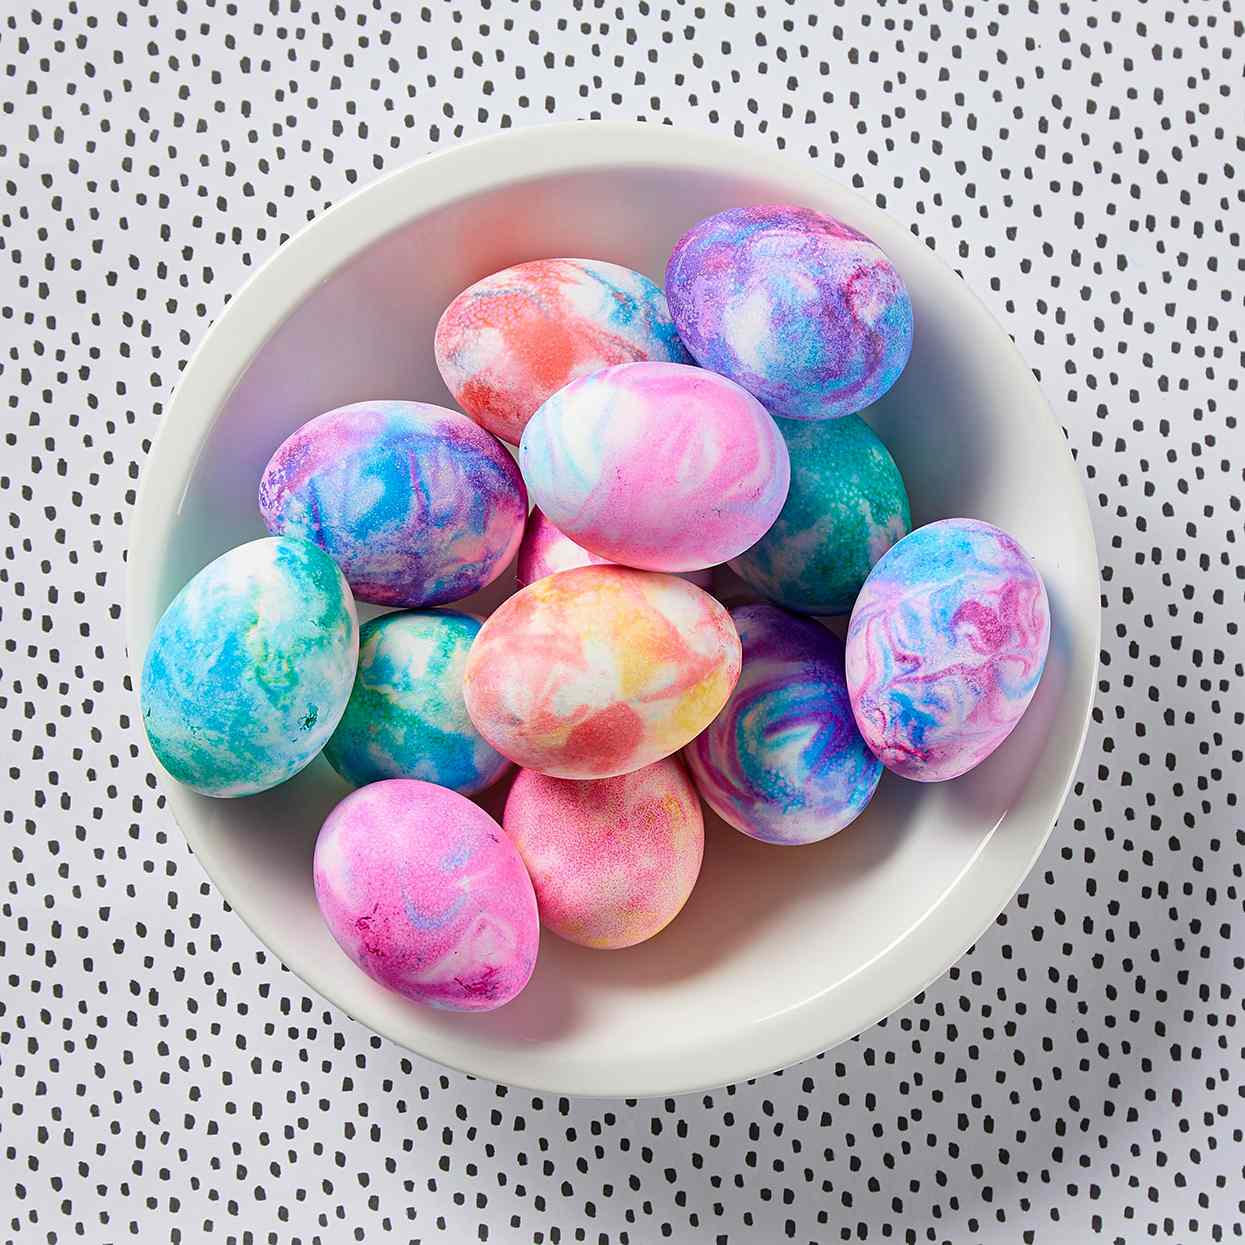 bowl of decorated eggs with swirled effect